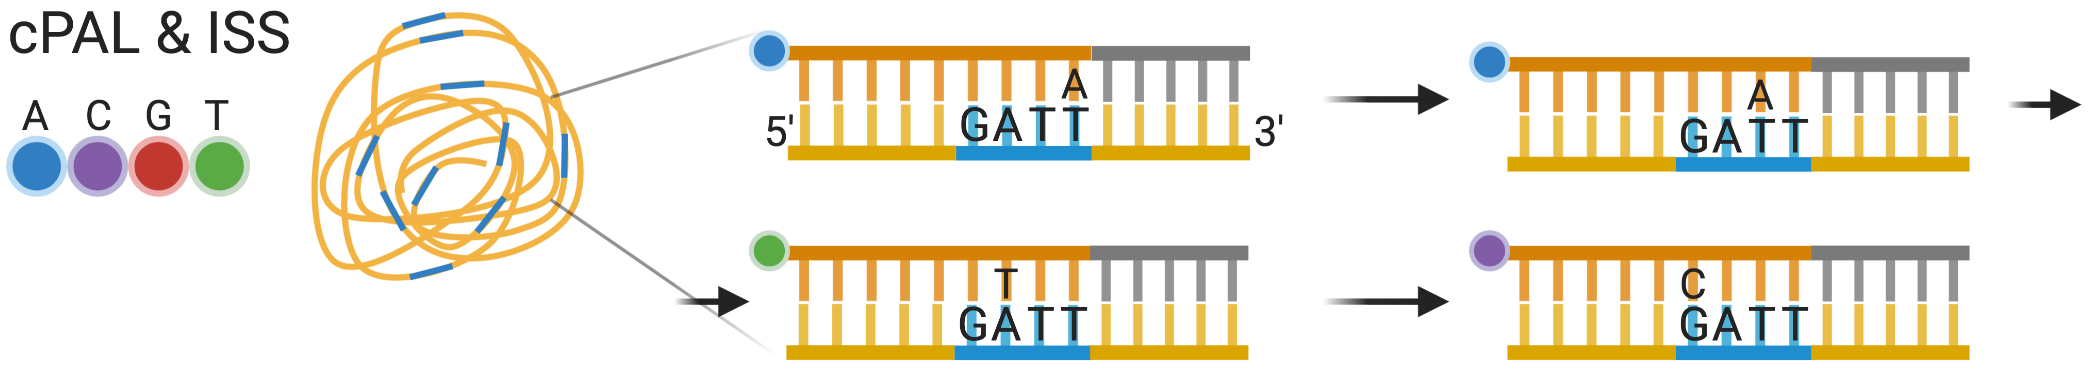 Schematic of cPAL as used in ISS.